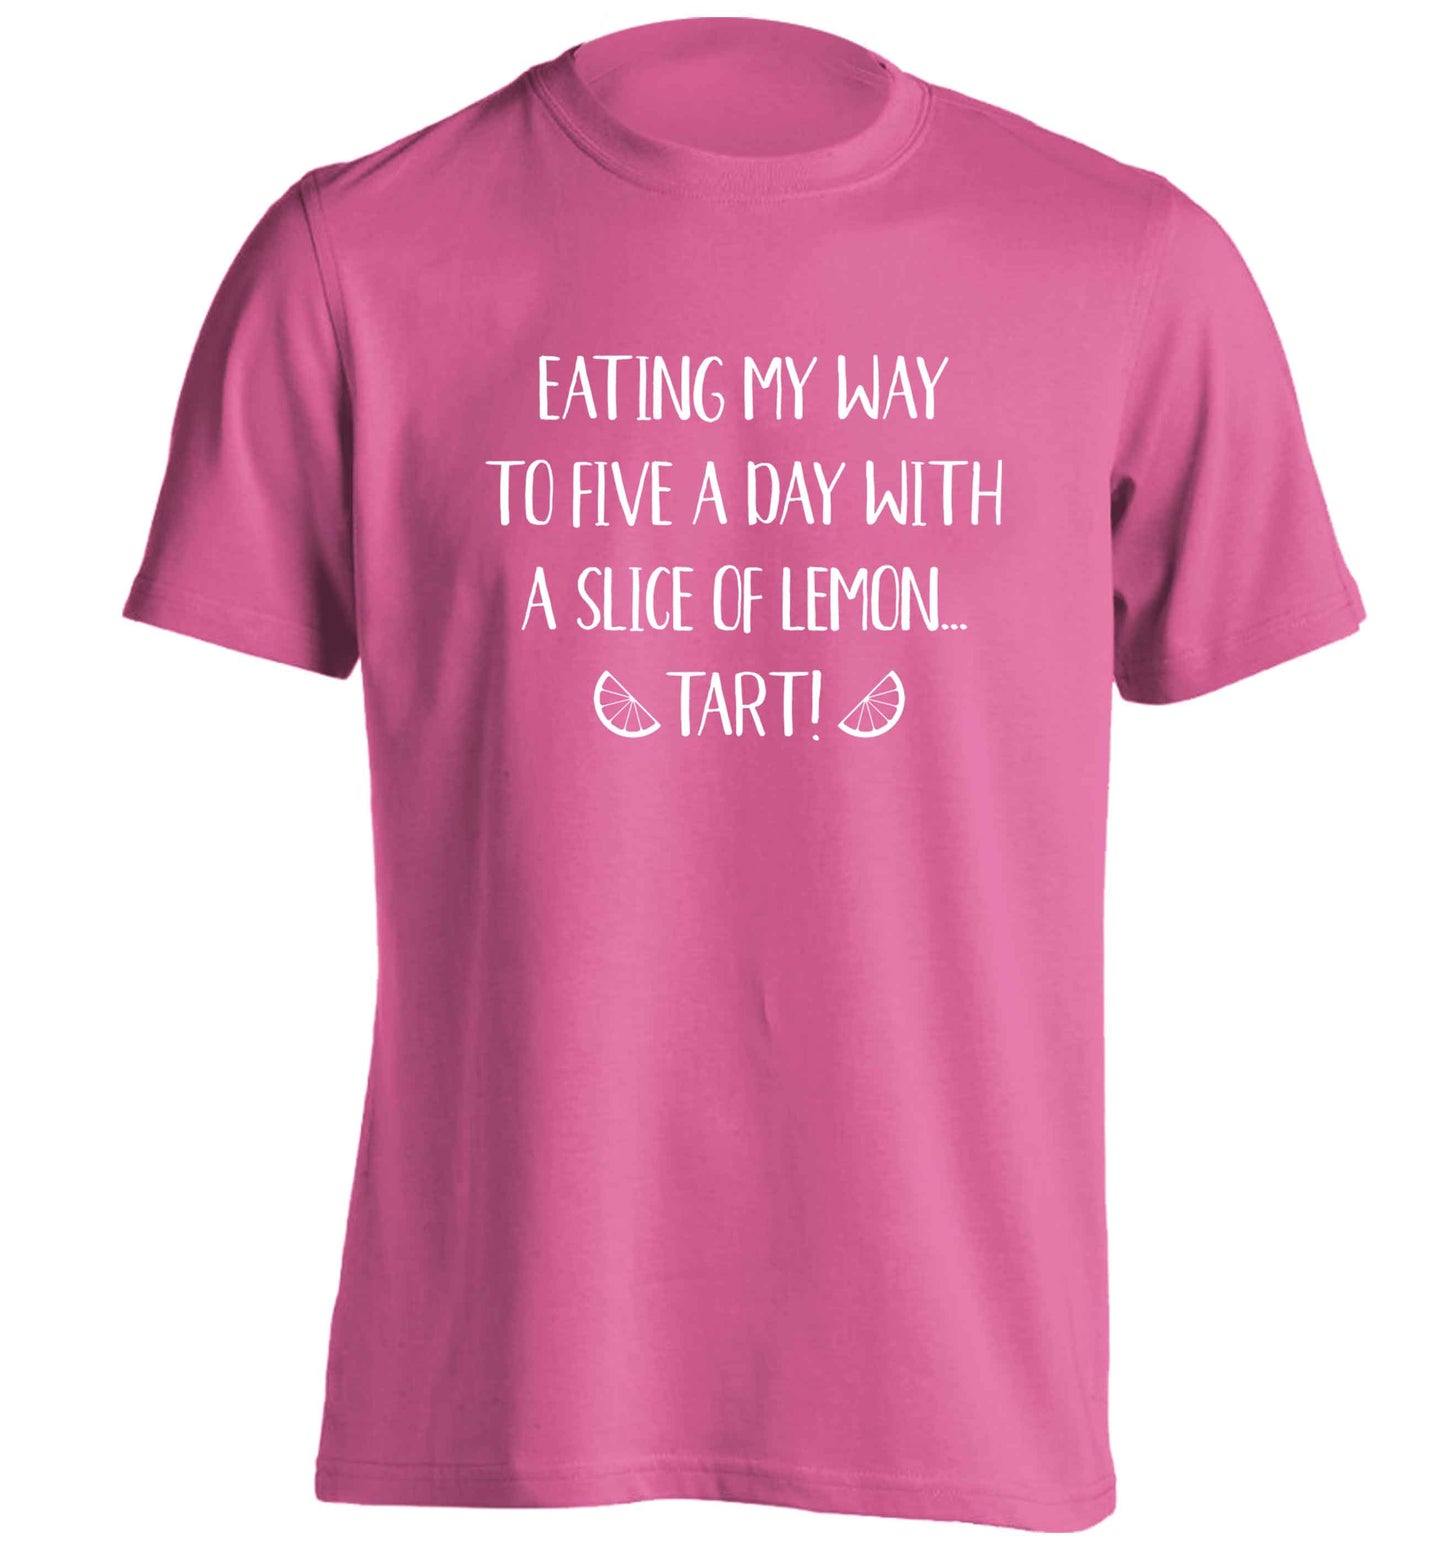 Eating my way to five a day with a slice of lemon tart adults unisex pink Tshirt 2XL